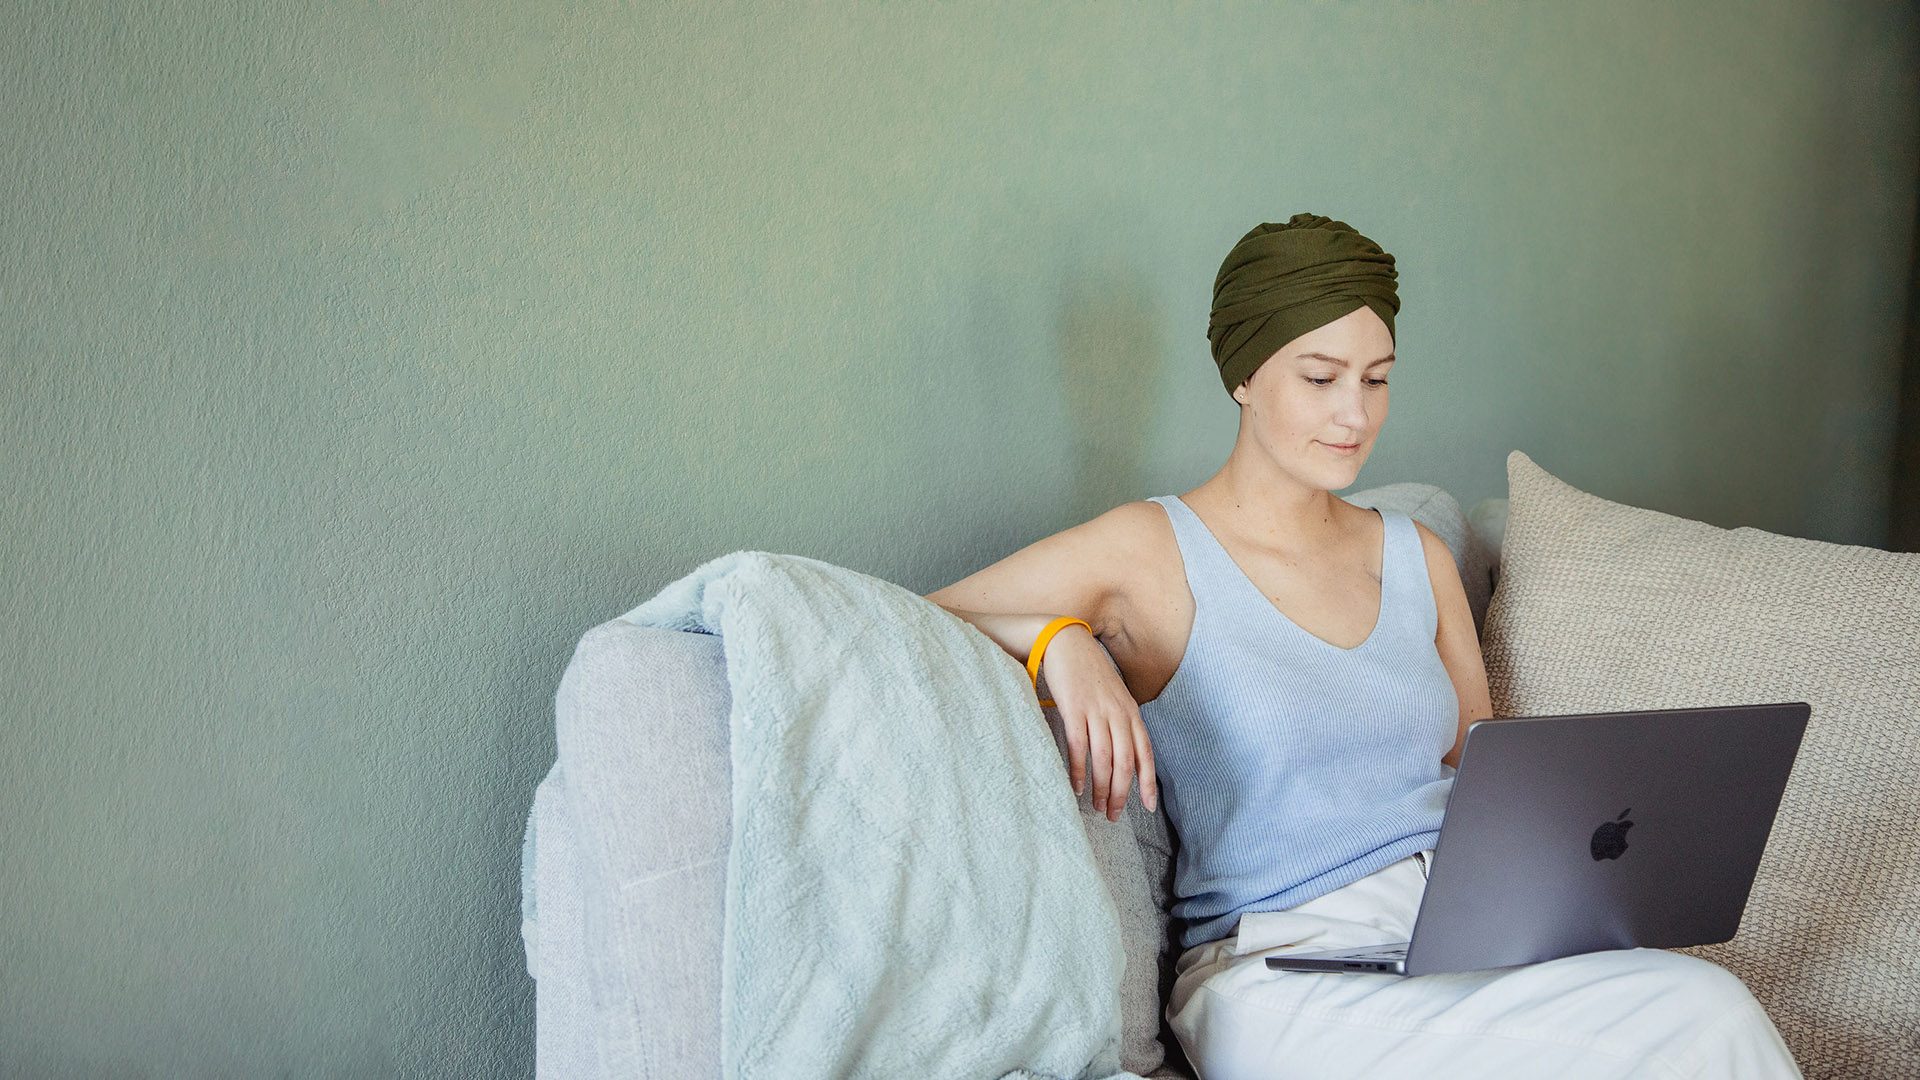 A female cancer patient sitting on the couch using a laptop